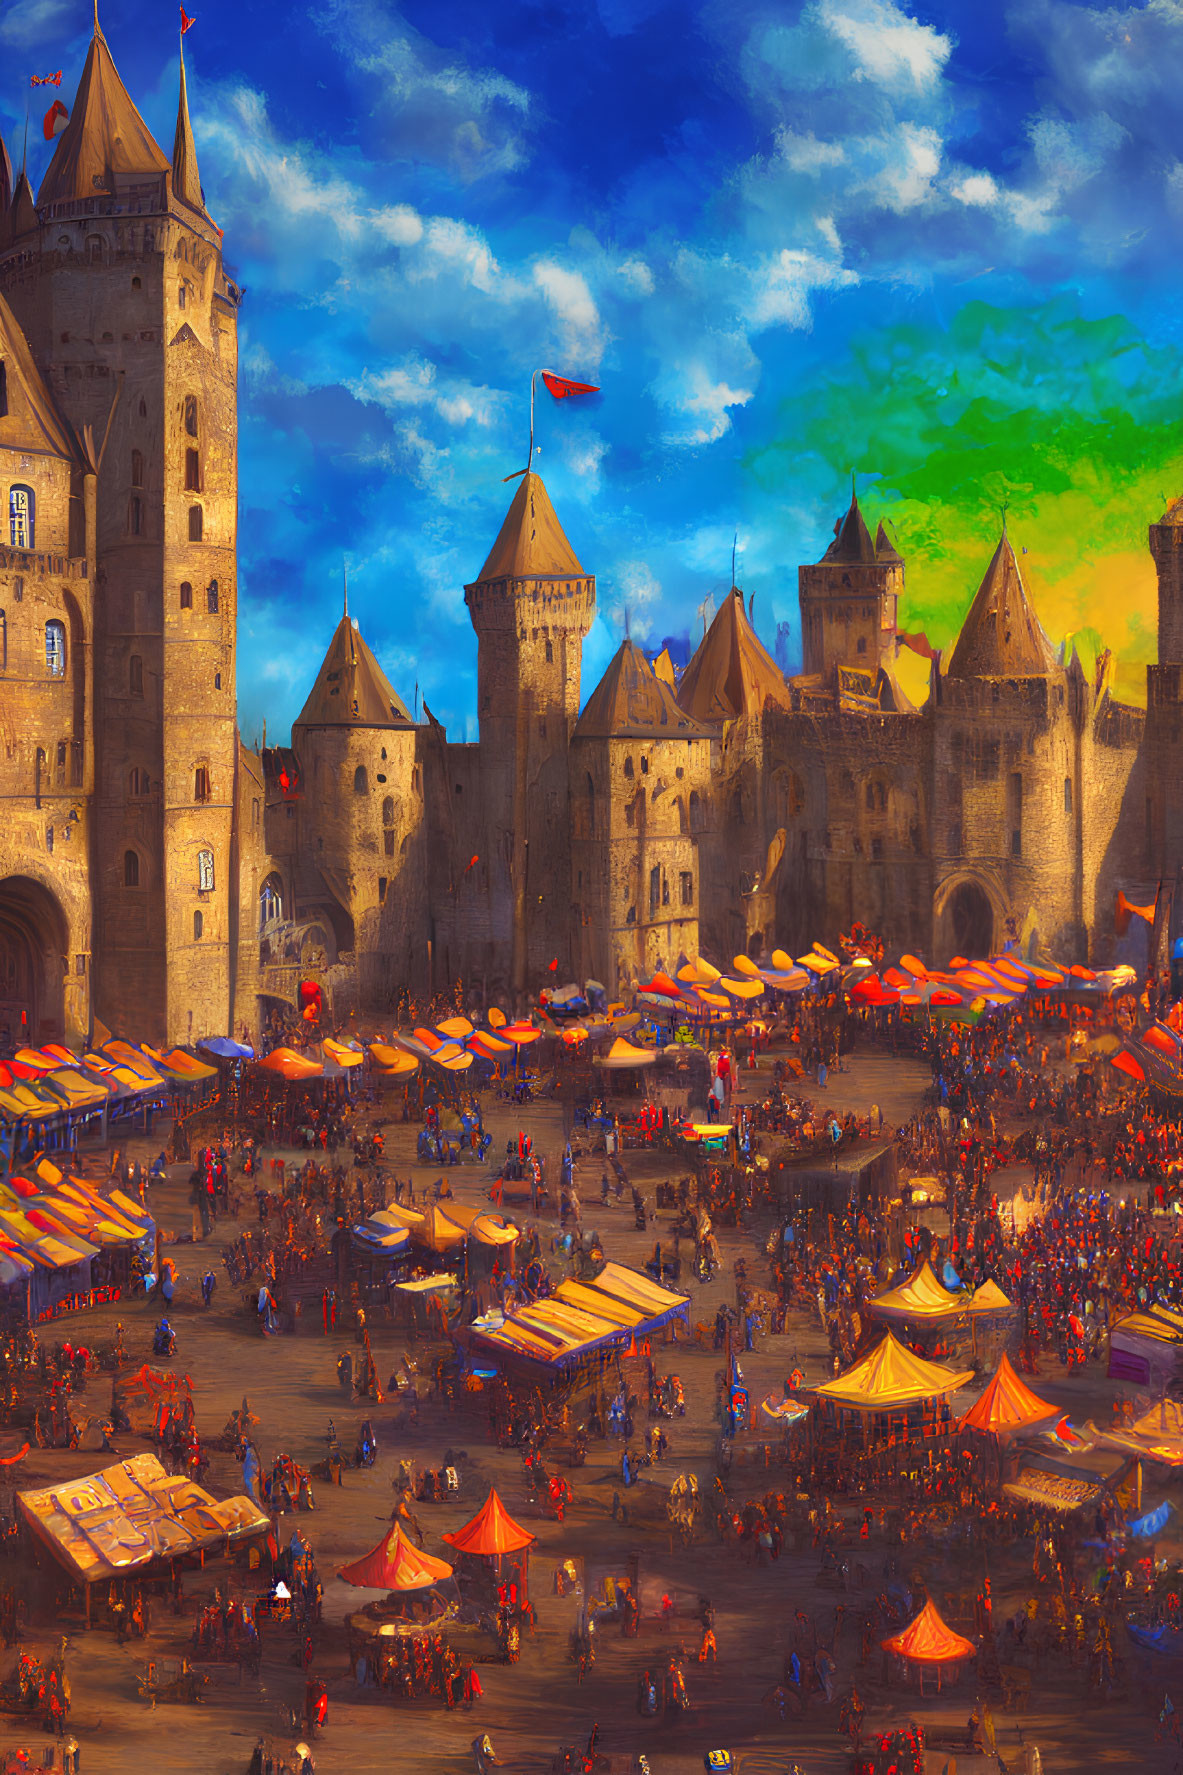 Medieval marketplace and grand castle with vibrant tents and crowds under dramatic sky